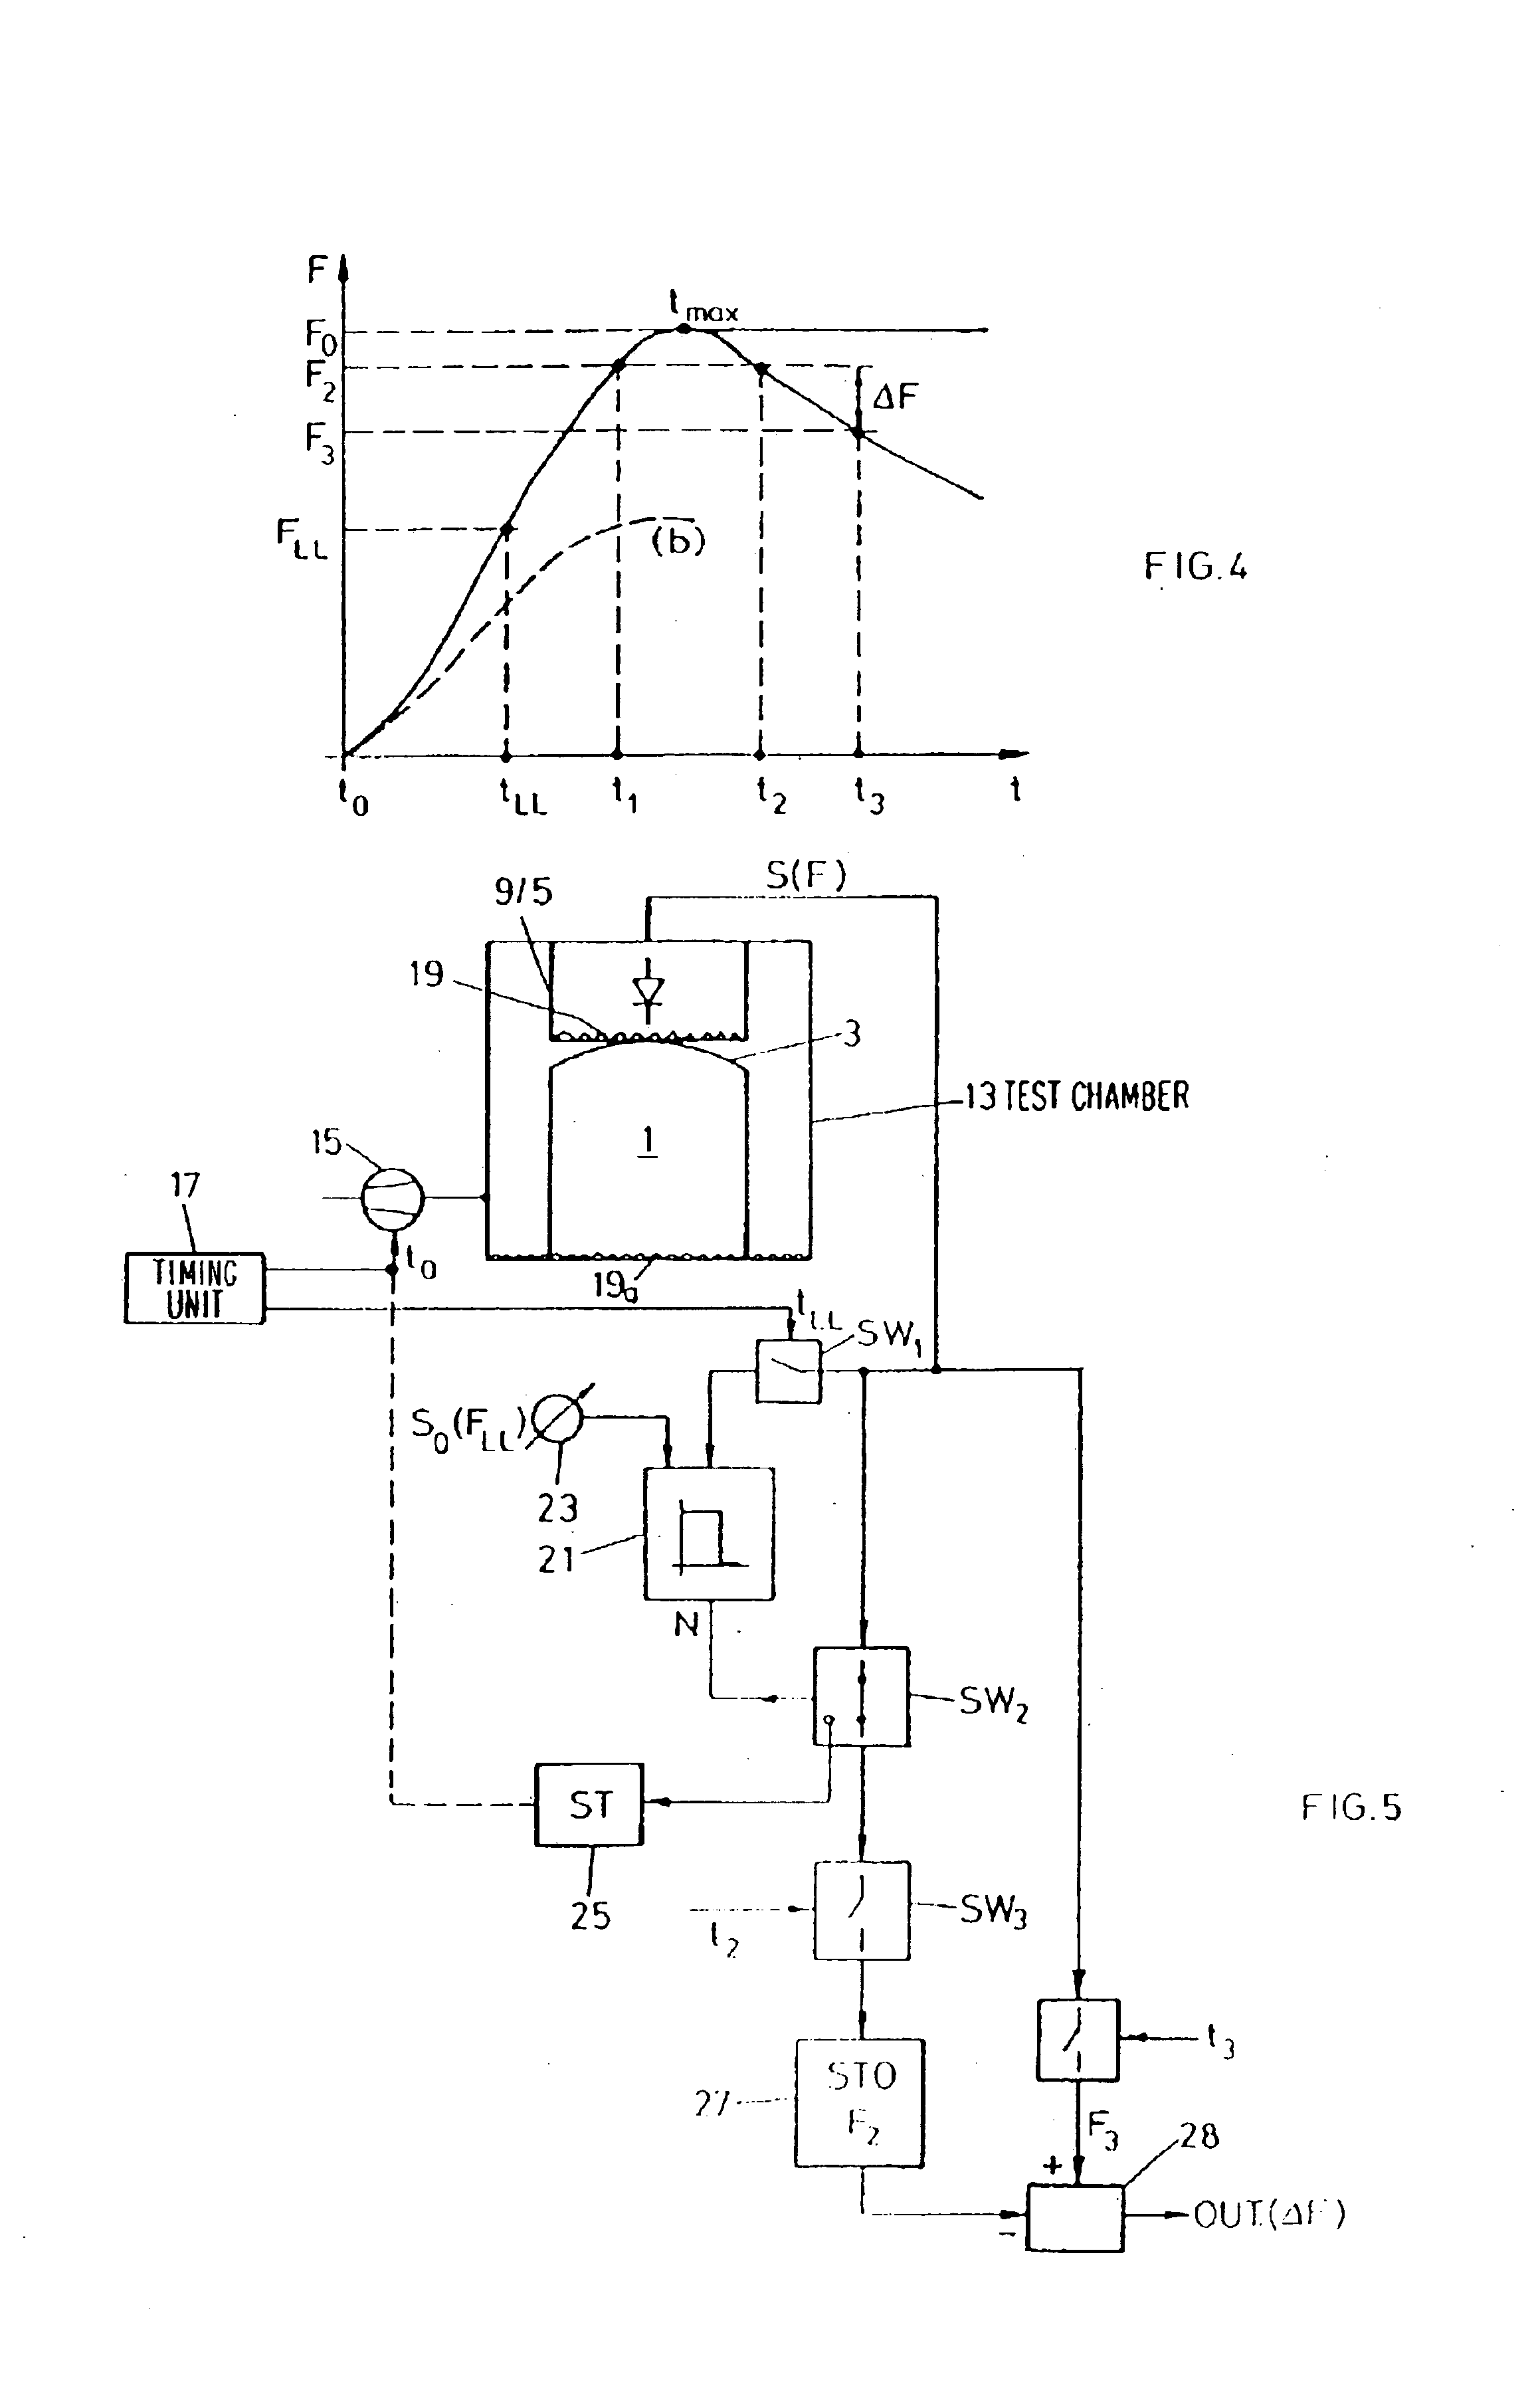 Method and apparatus for leak testing closed containers